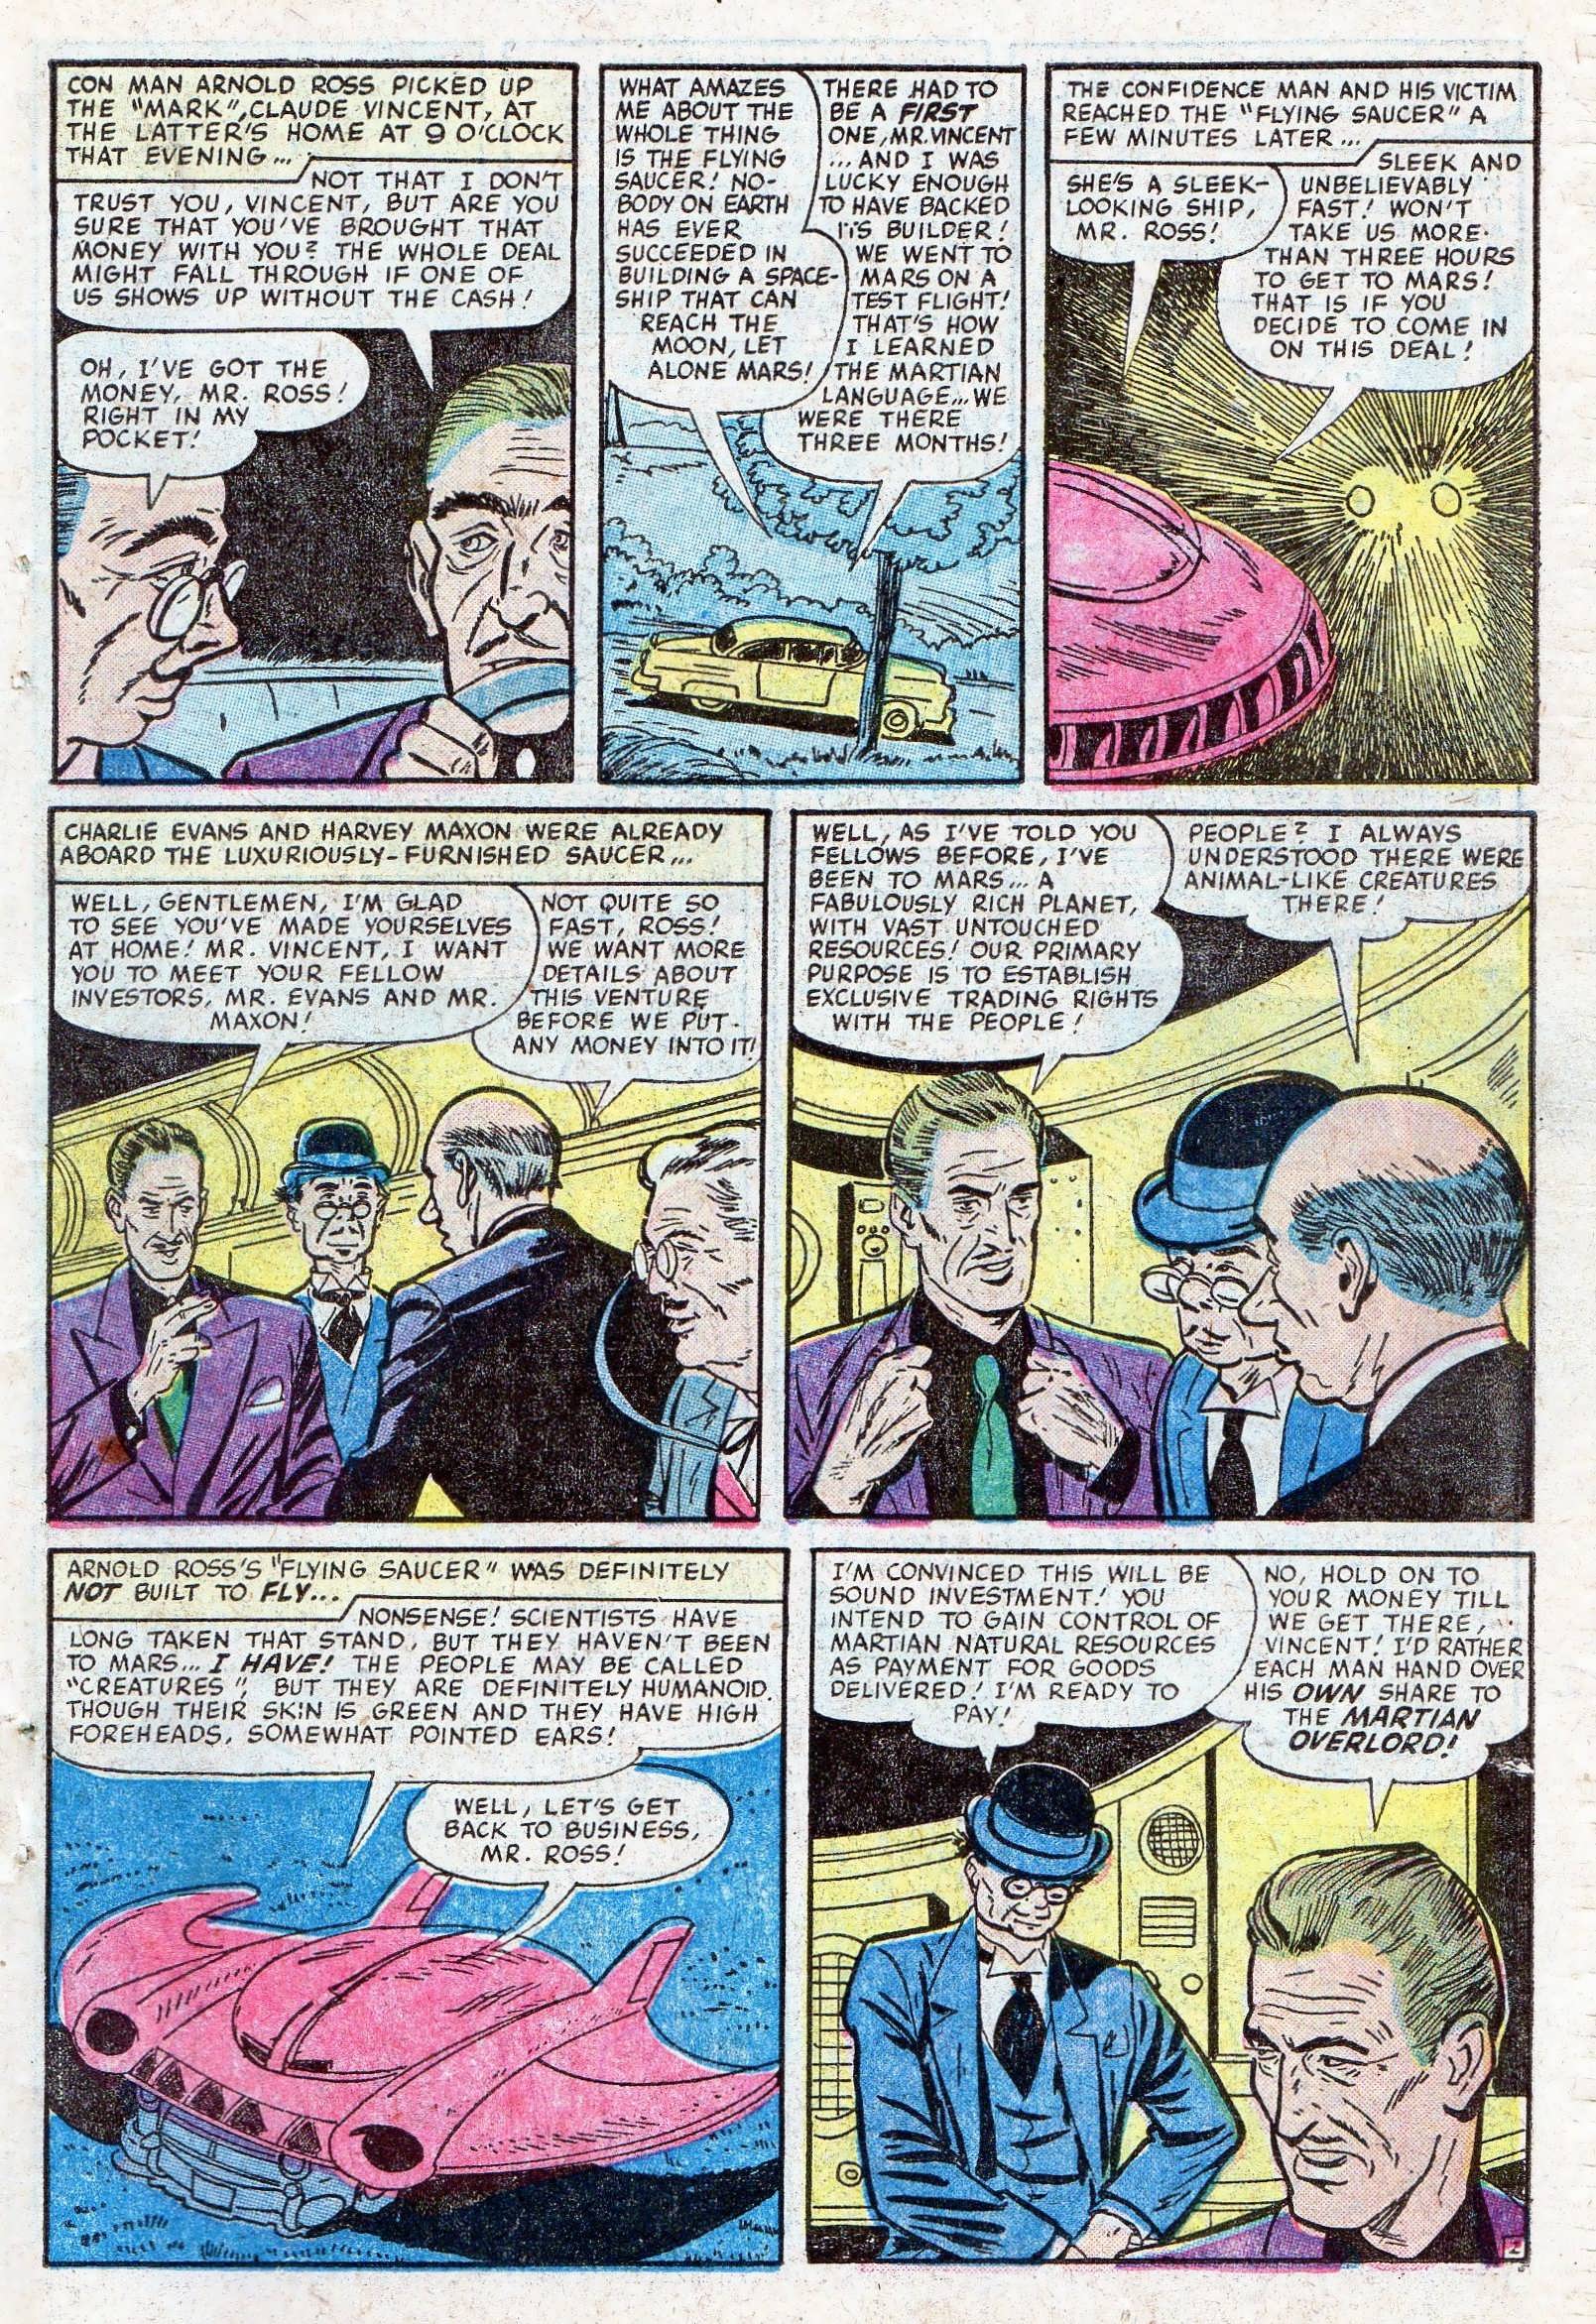 Marvel Tales (1949) 155 Page 22